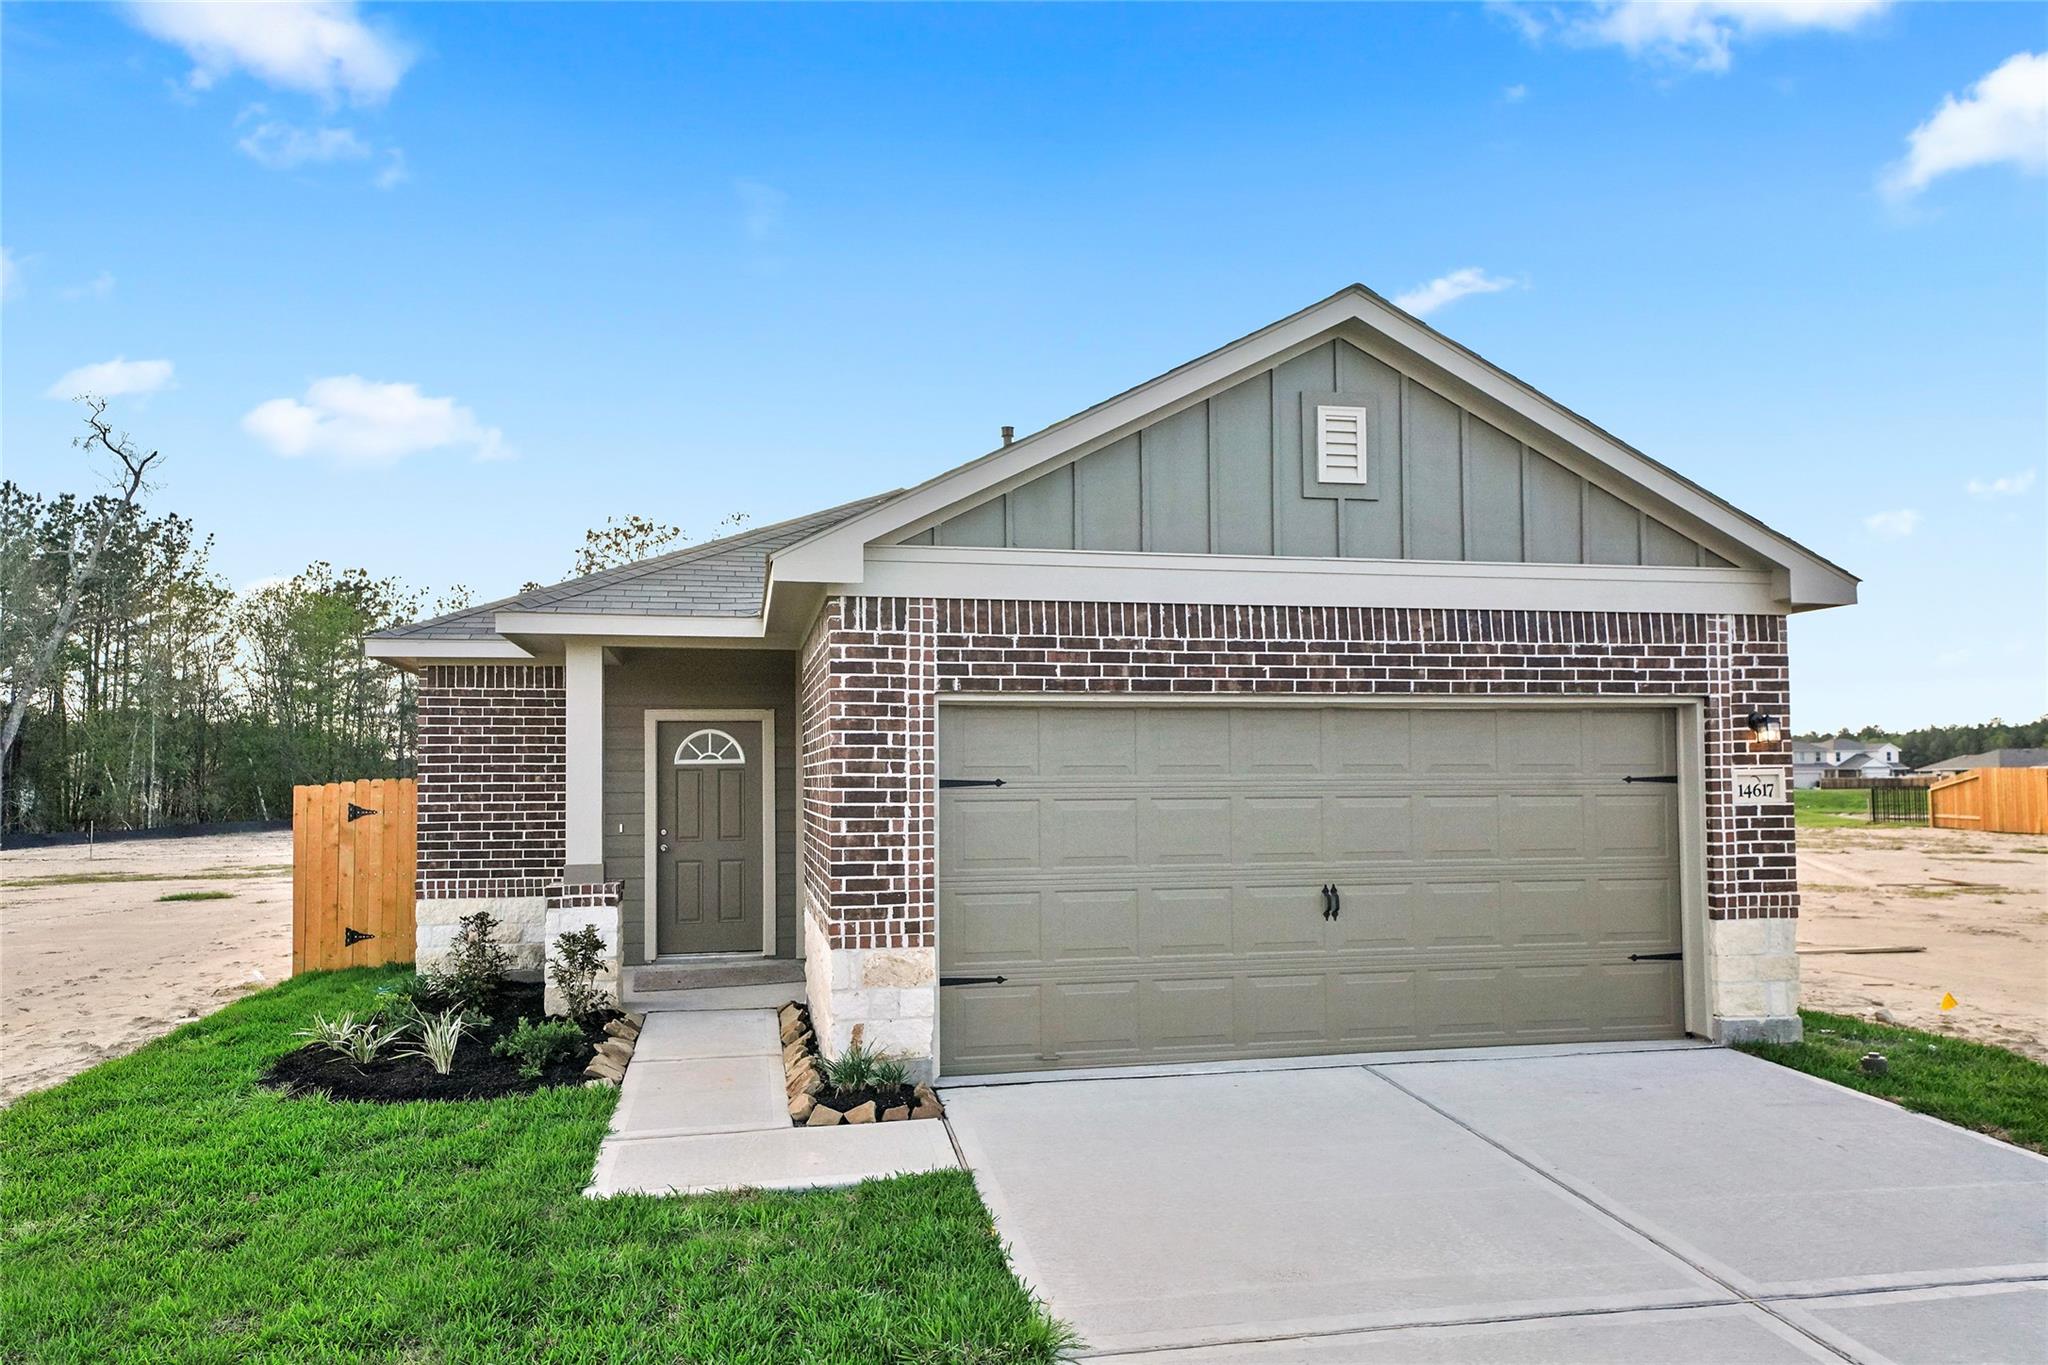 Representative photo. Not actual home. - If you have additional questions regarding 14243 Grand Hills Drive  in Conroe or would like to tour the property with us call 800-660-1022 and reference MLS# 70956836.